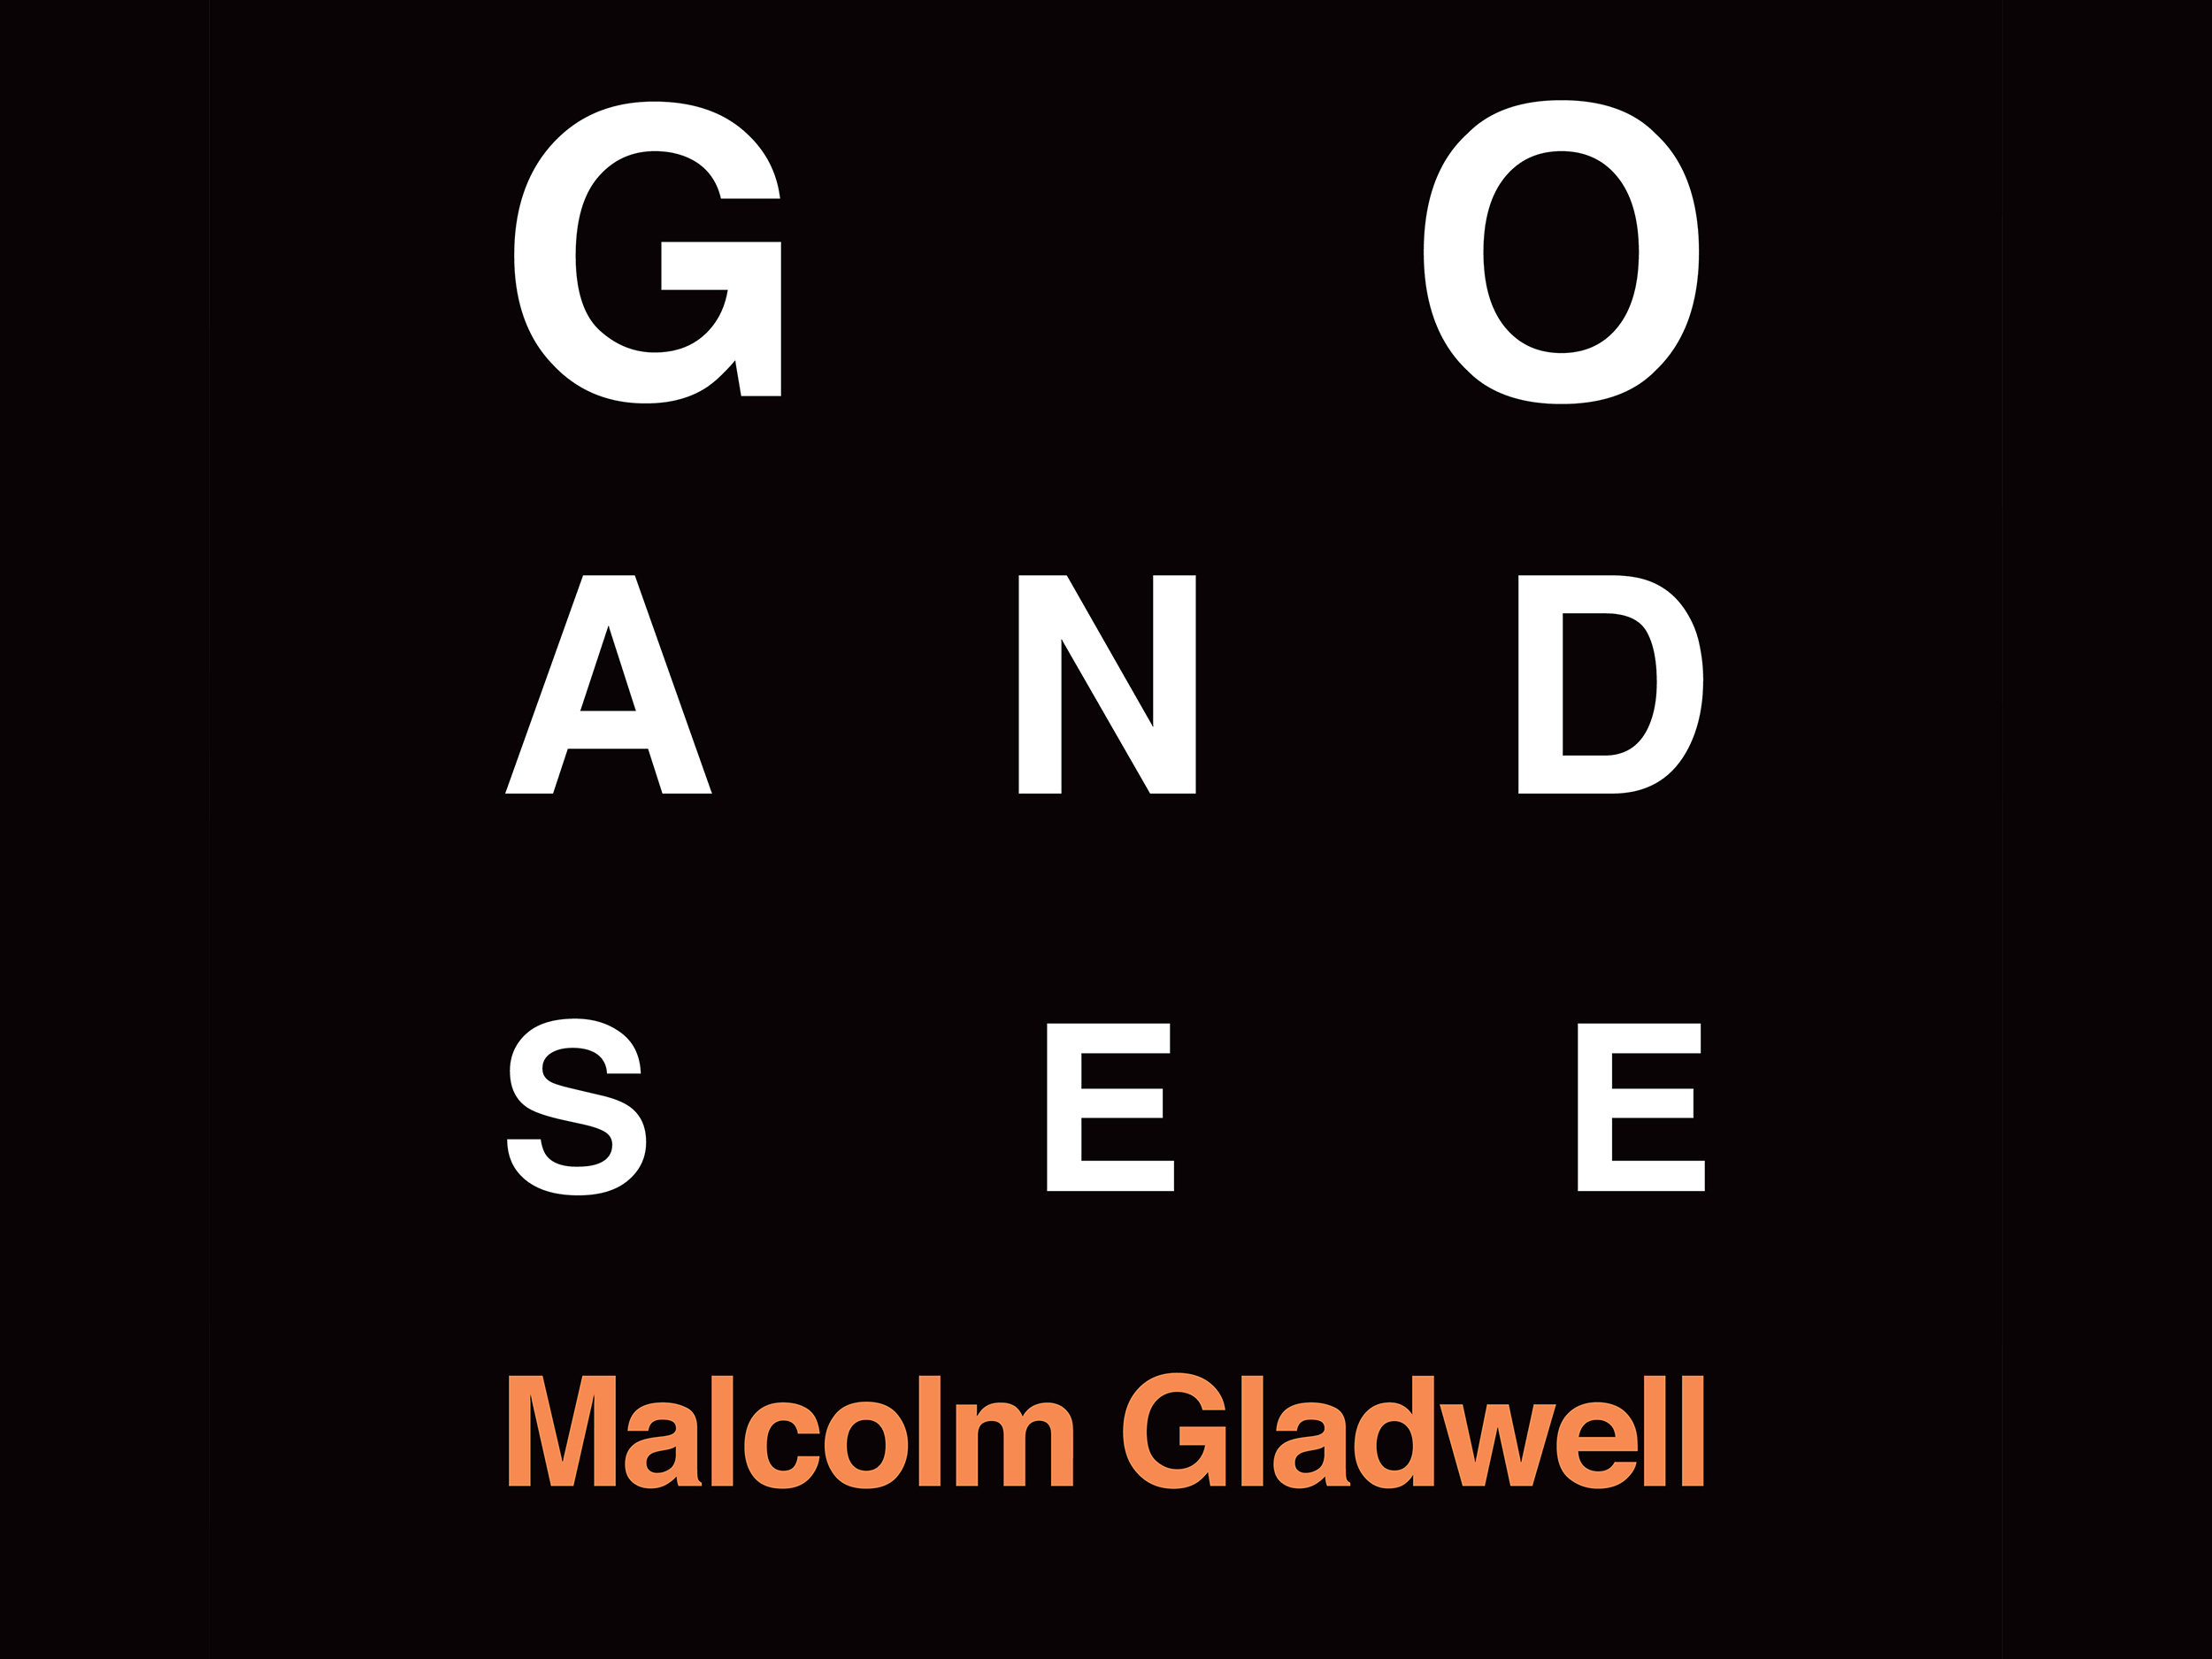 Go And See Malcom Gladwell